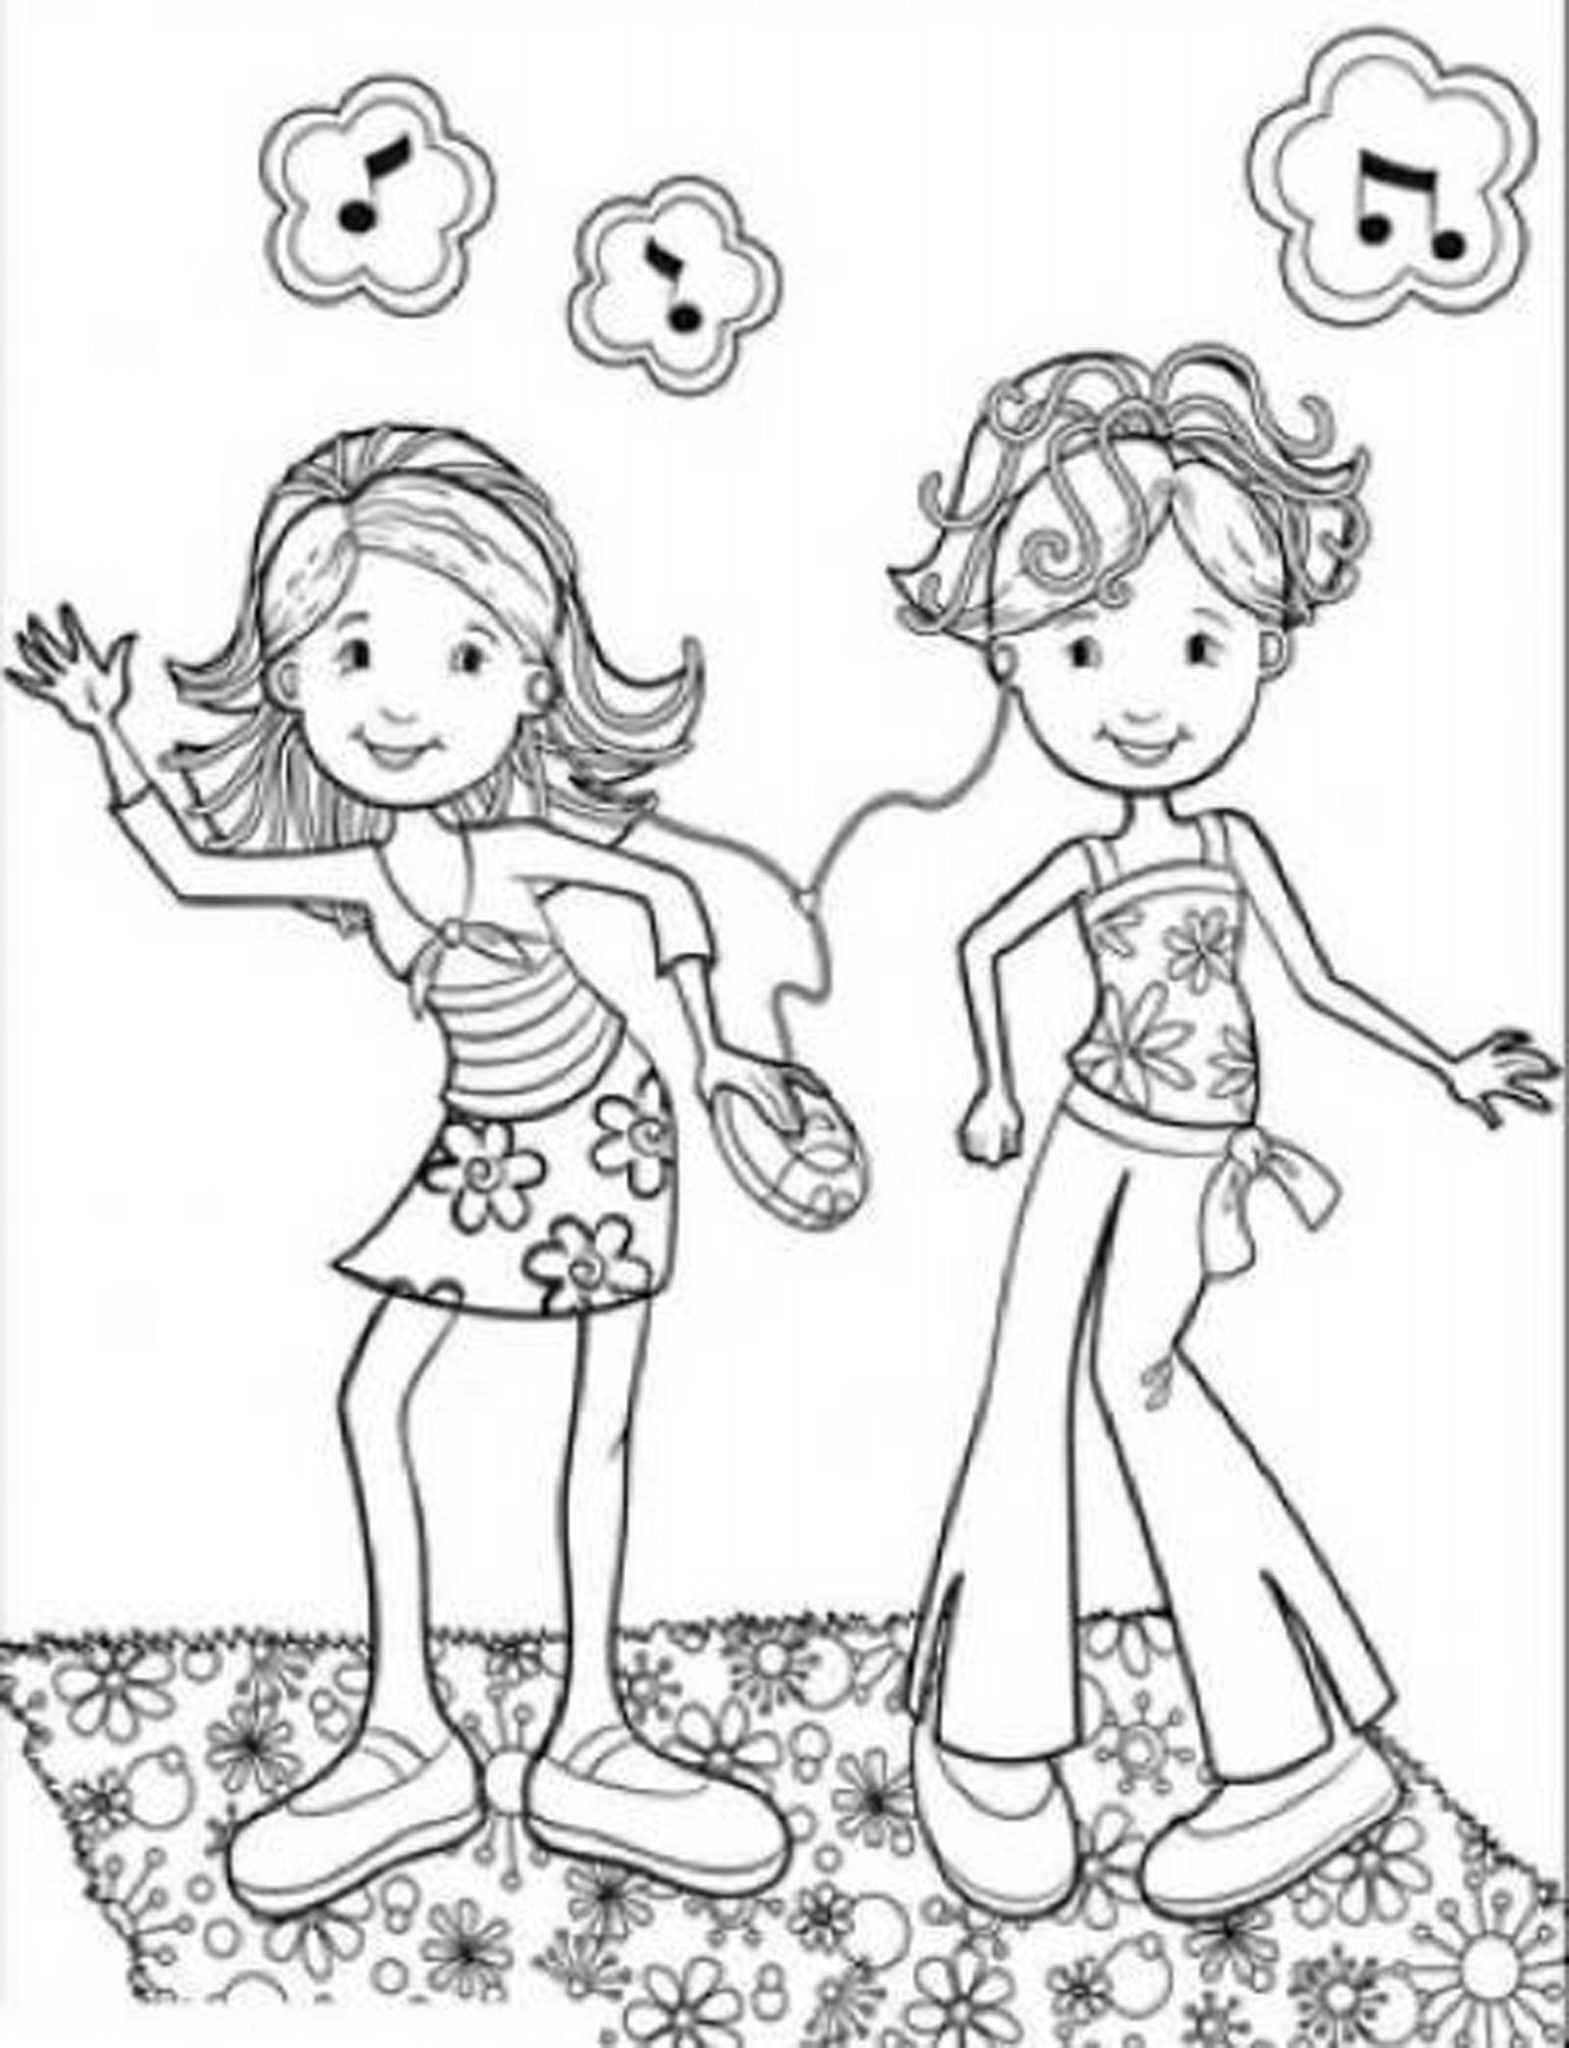 Kawaii Coloring Pages For Girls
 Print & Download Coloring Pages for Girls Re mend a